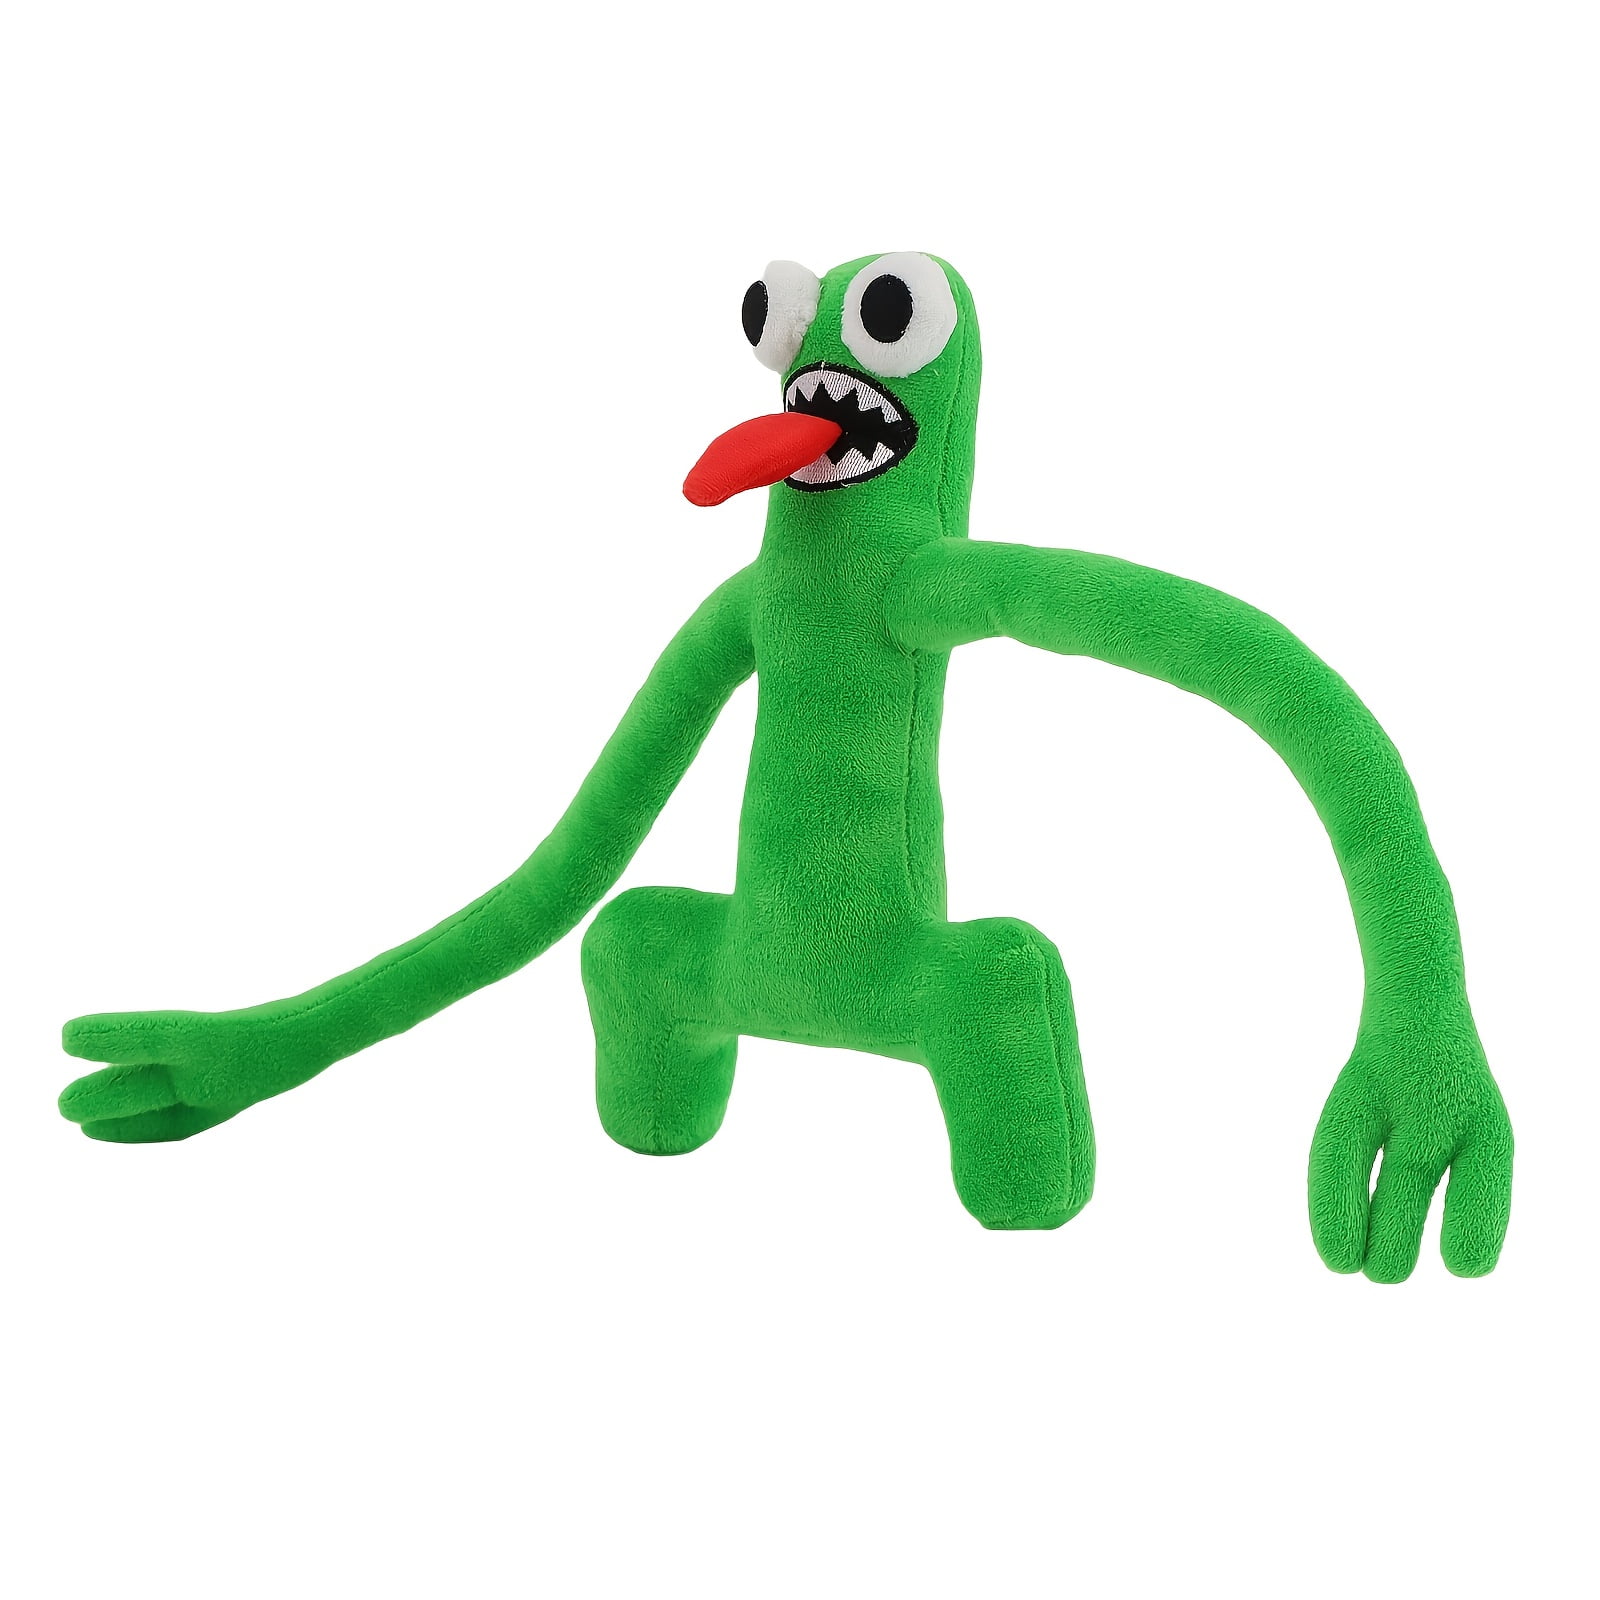 Plush Toy Cartoon Game Character Doll Kawaii Green Monster Soft Stuffed  Animal Toys For Fans 